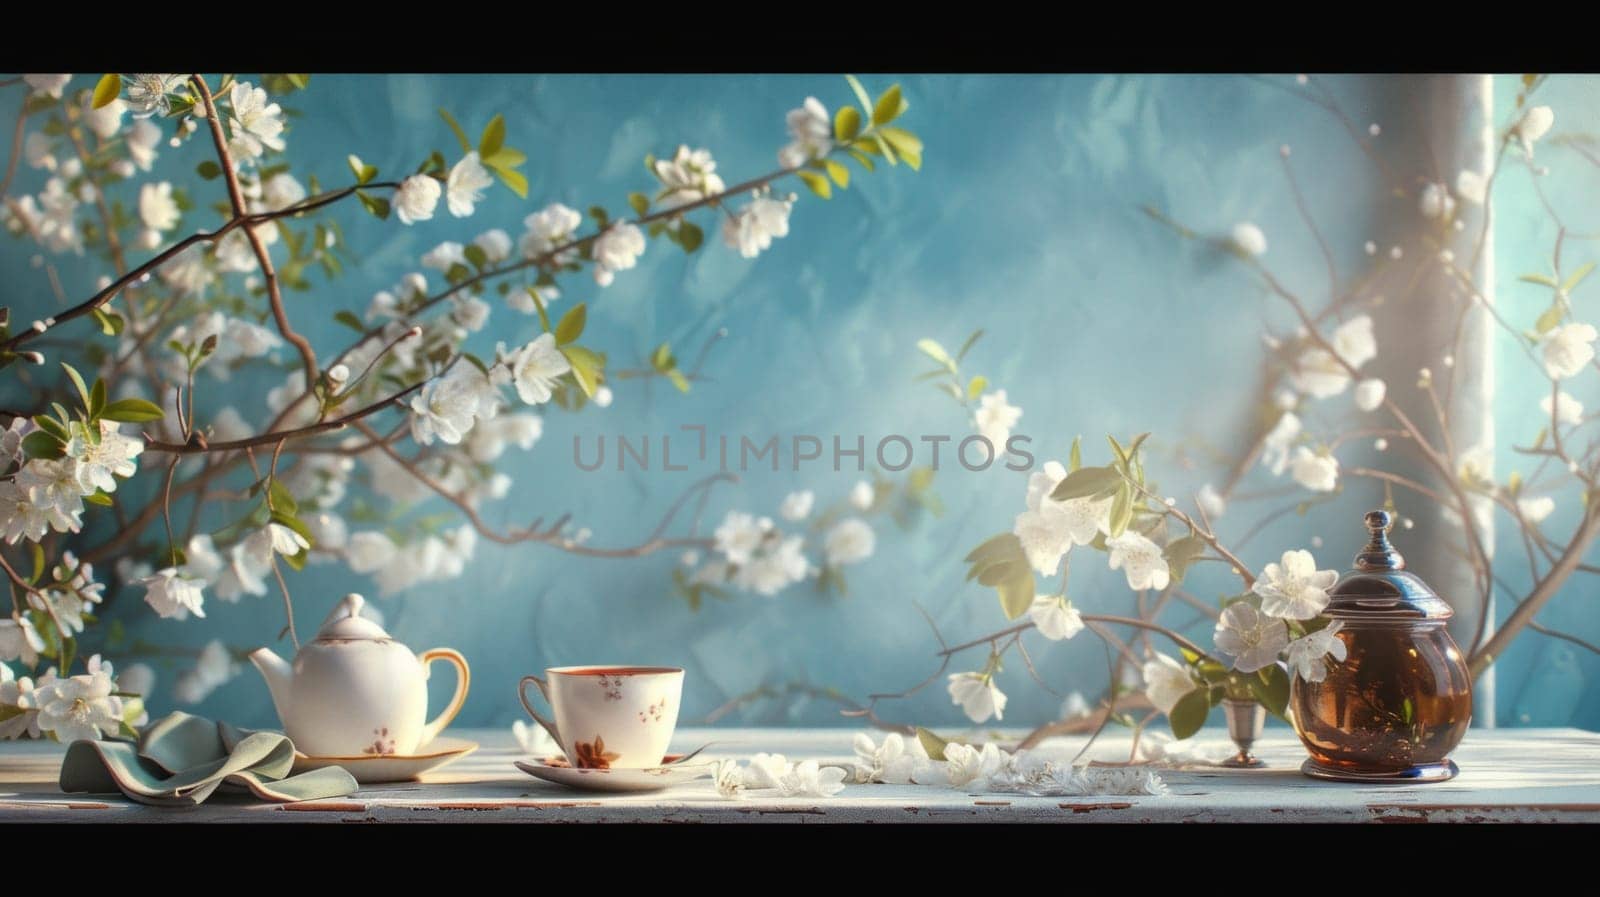 Cup of tea on table with spring blossom in background. Relaxing breakfast tea time concept. Springtime composition.